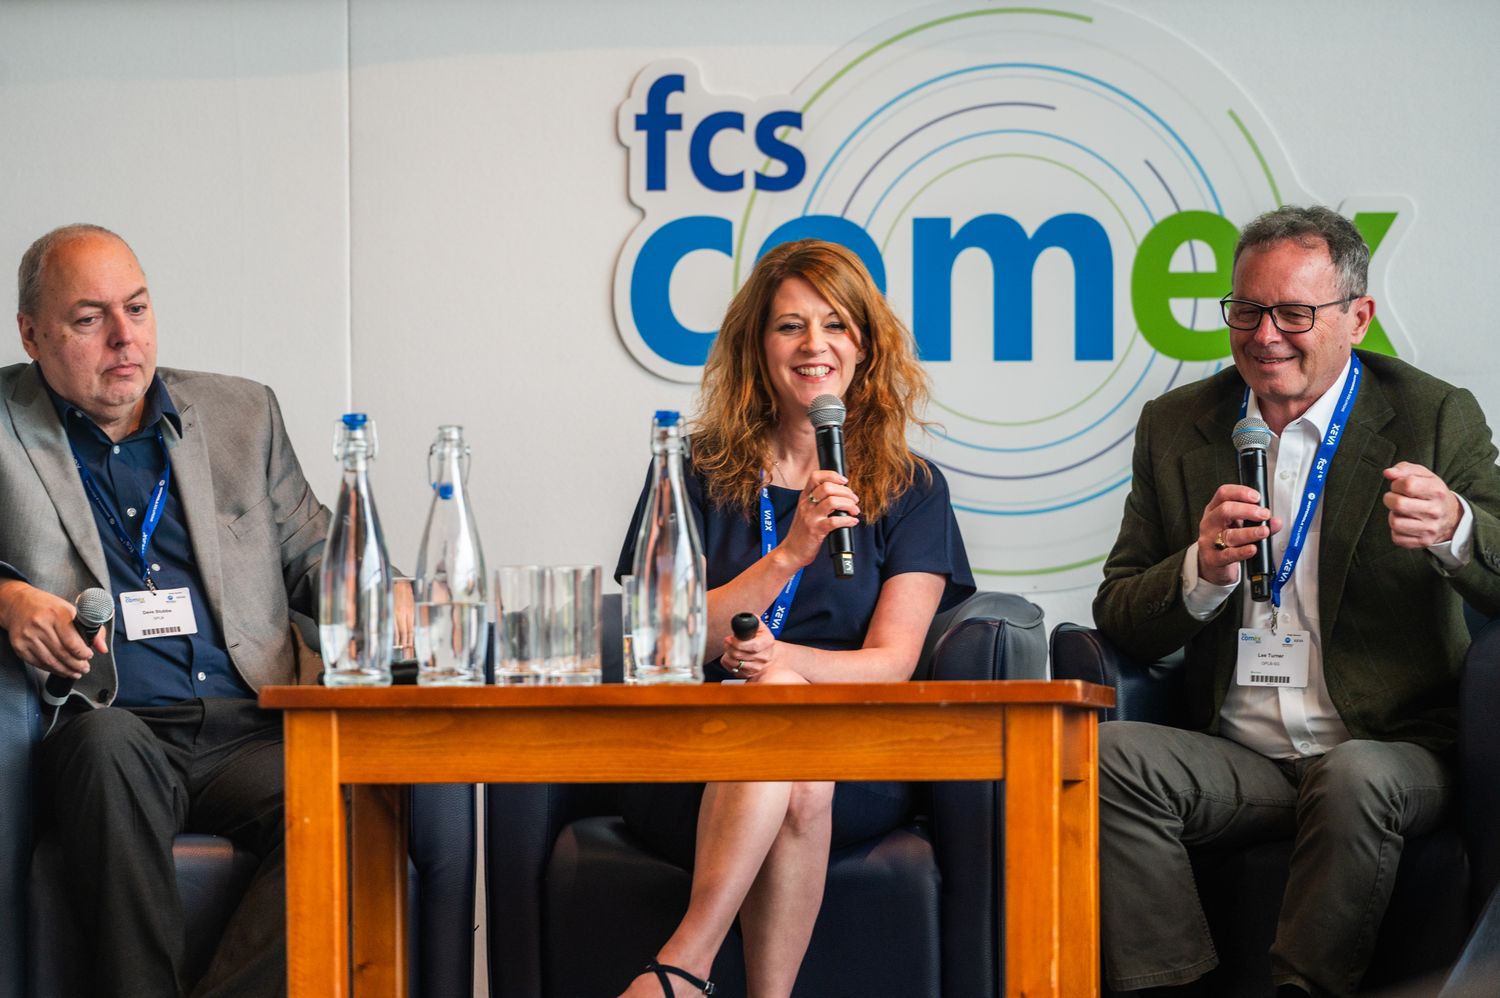 FCS, The Federation of Communication Services